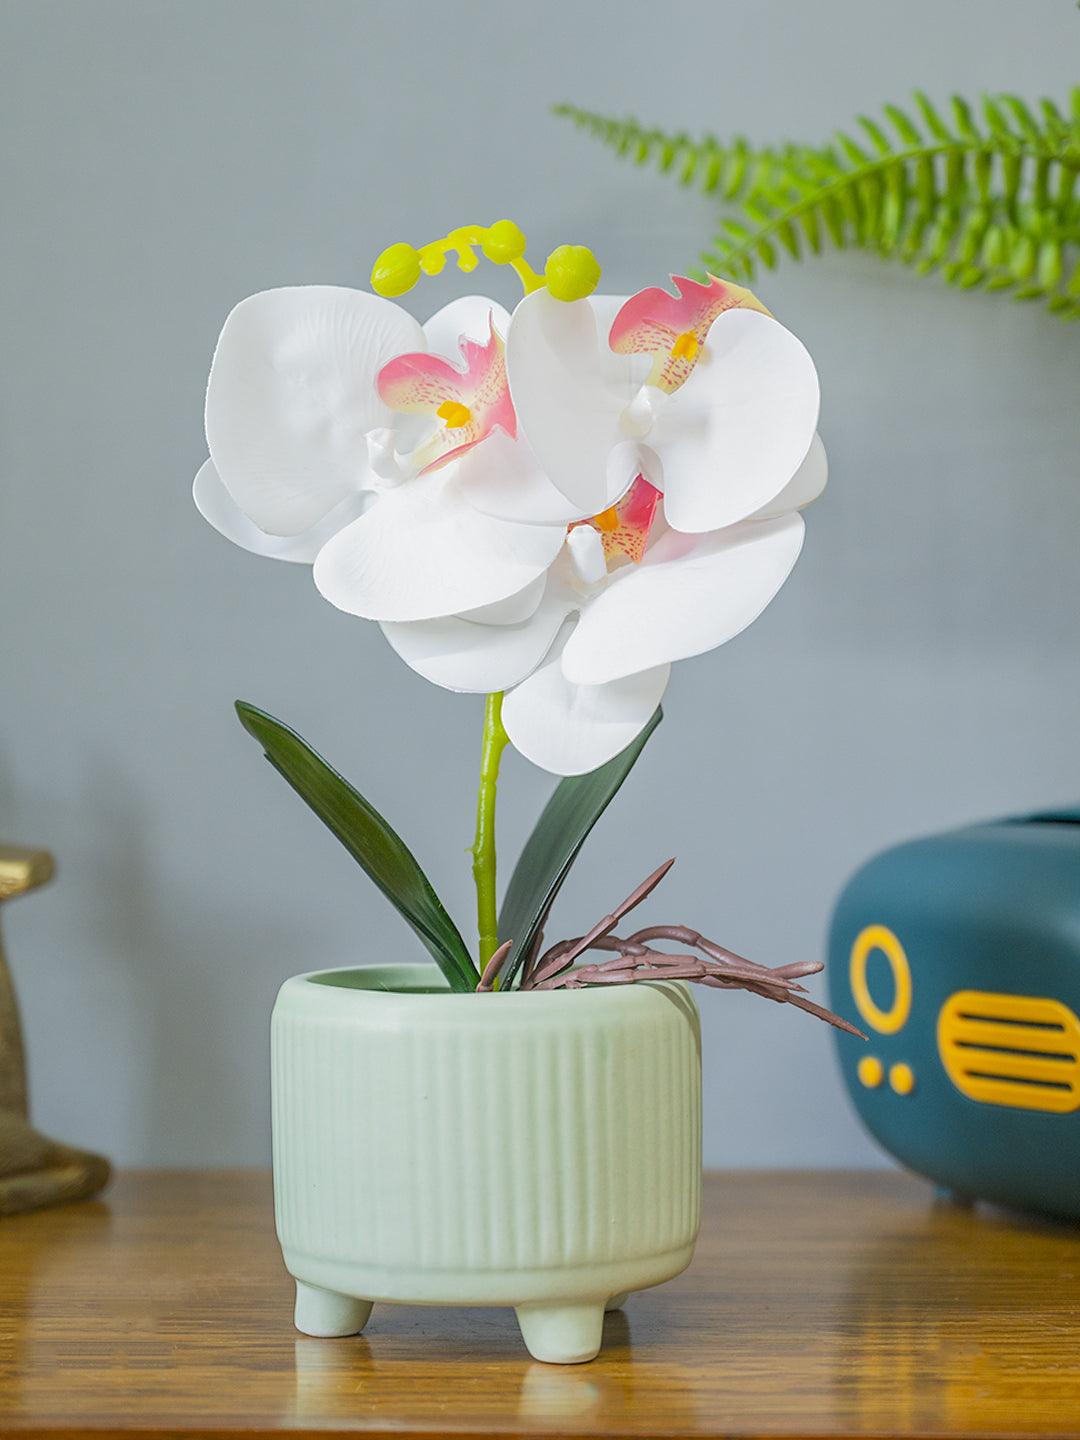 White Orchid Flowers With White Tumbler Pot - MARKET99